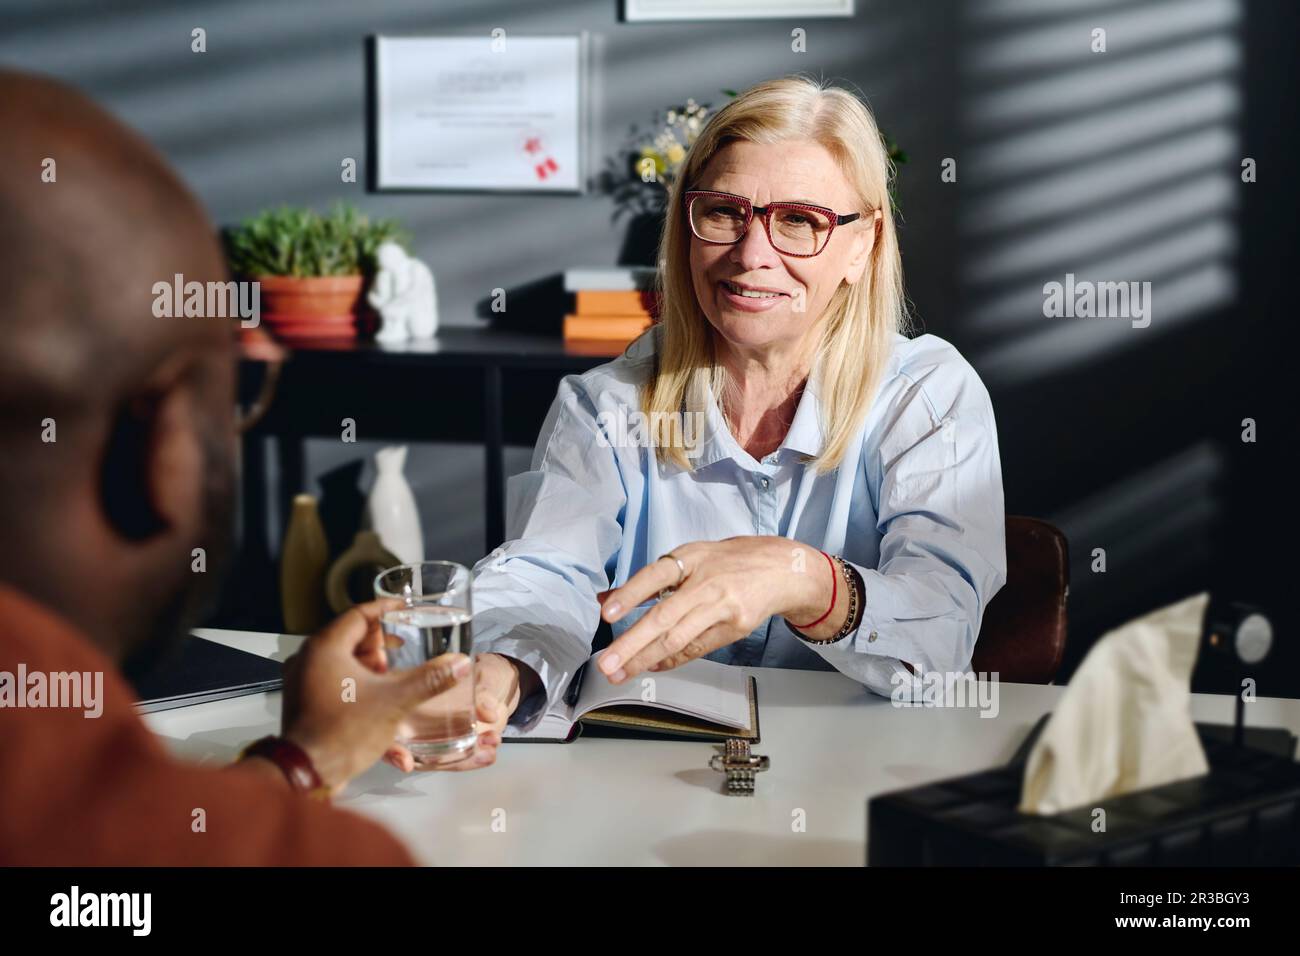 Smiling blond psychologist giving glass of water to patient at office Stock Photo